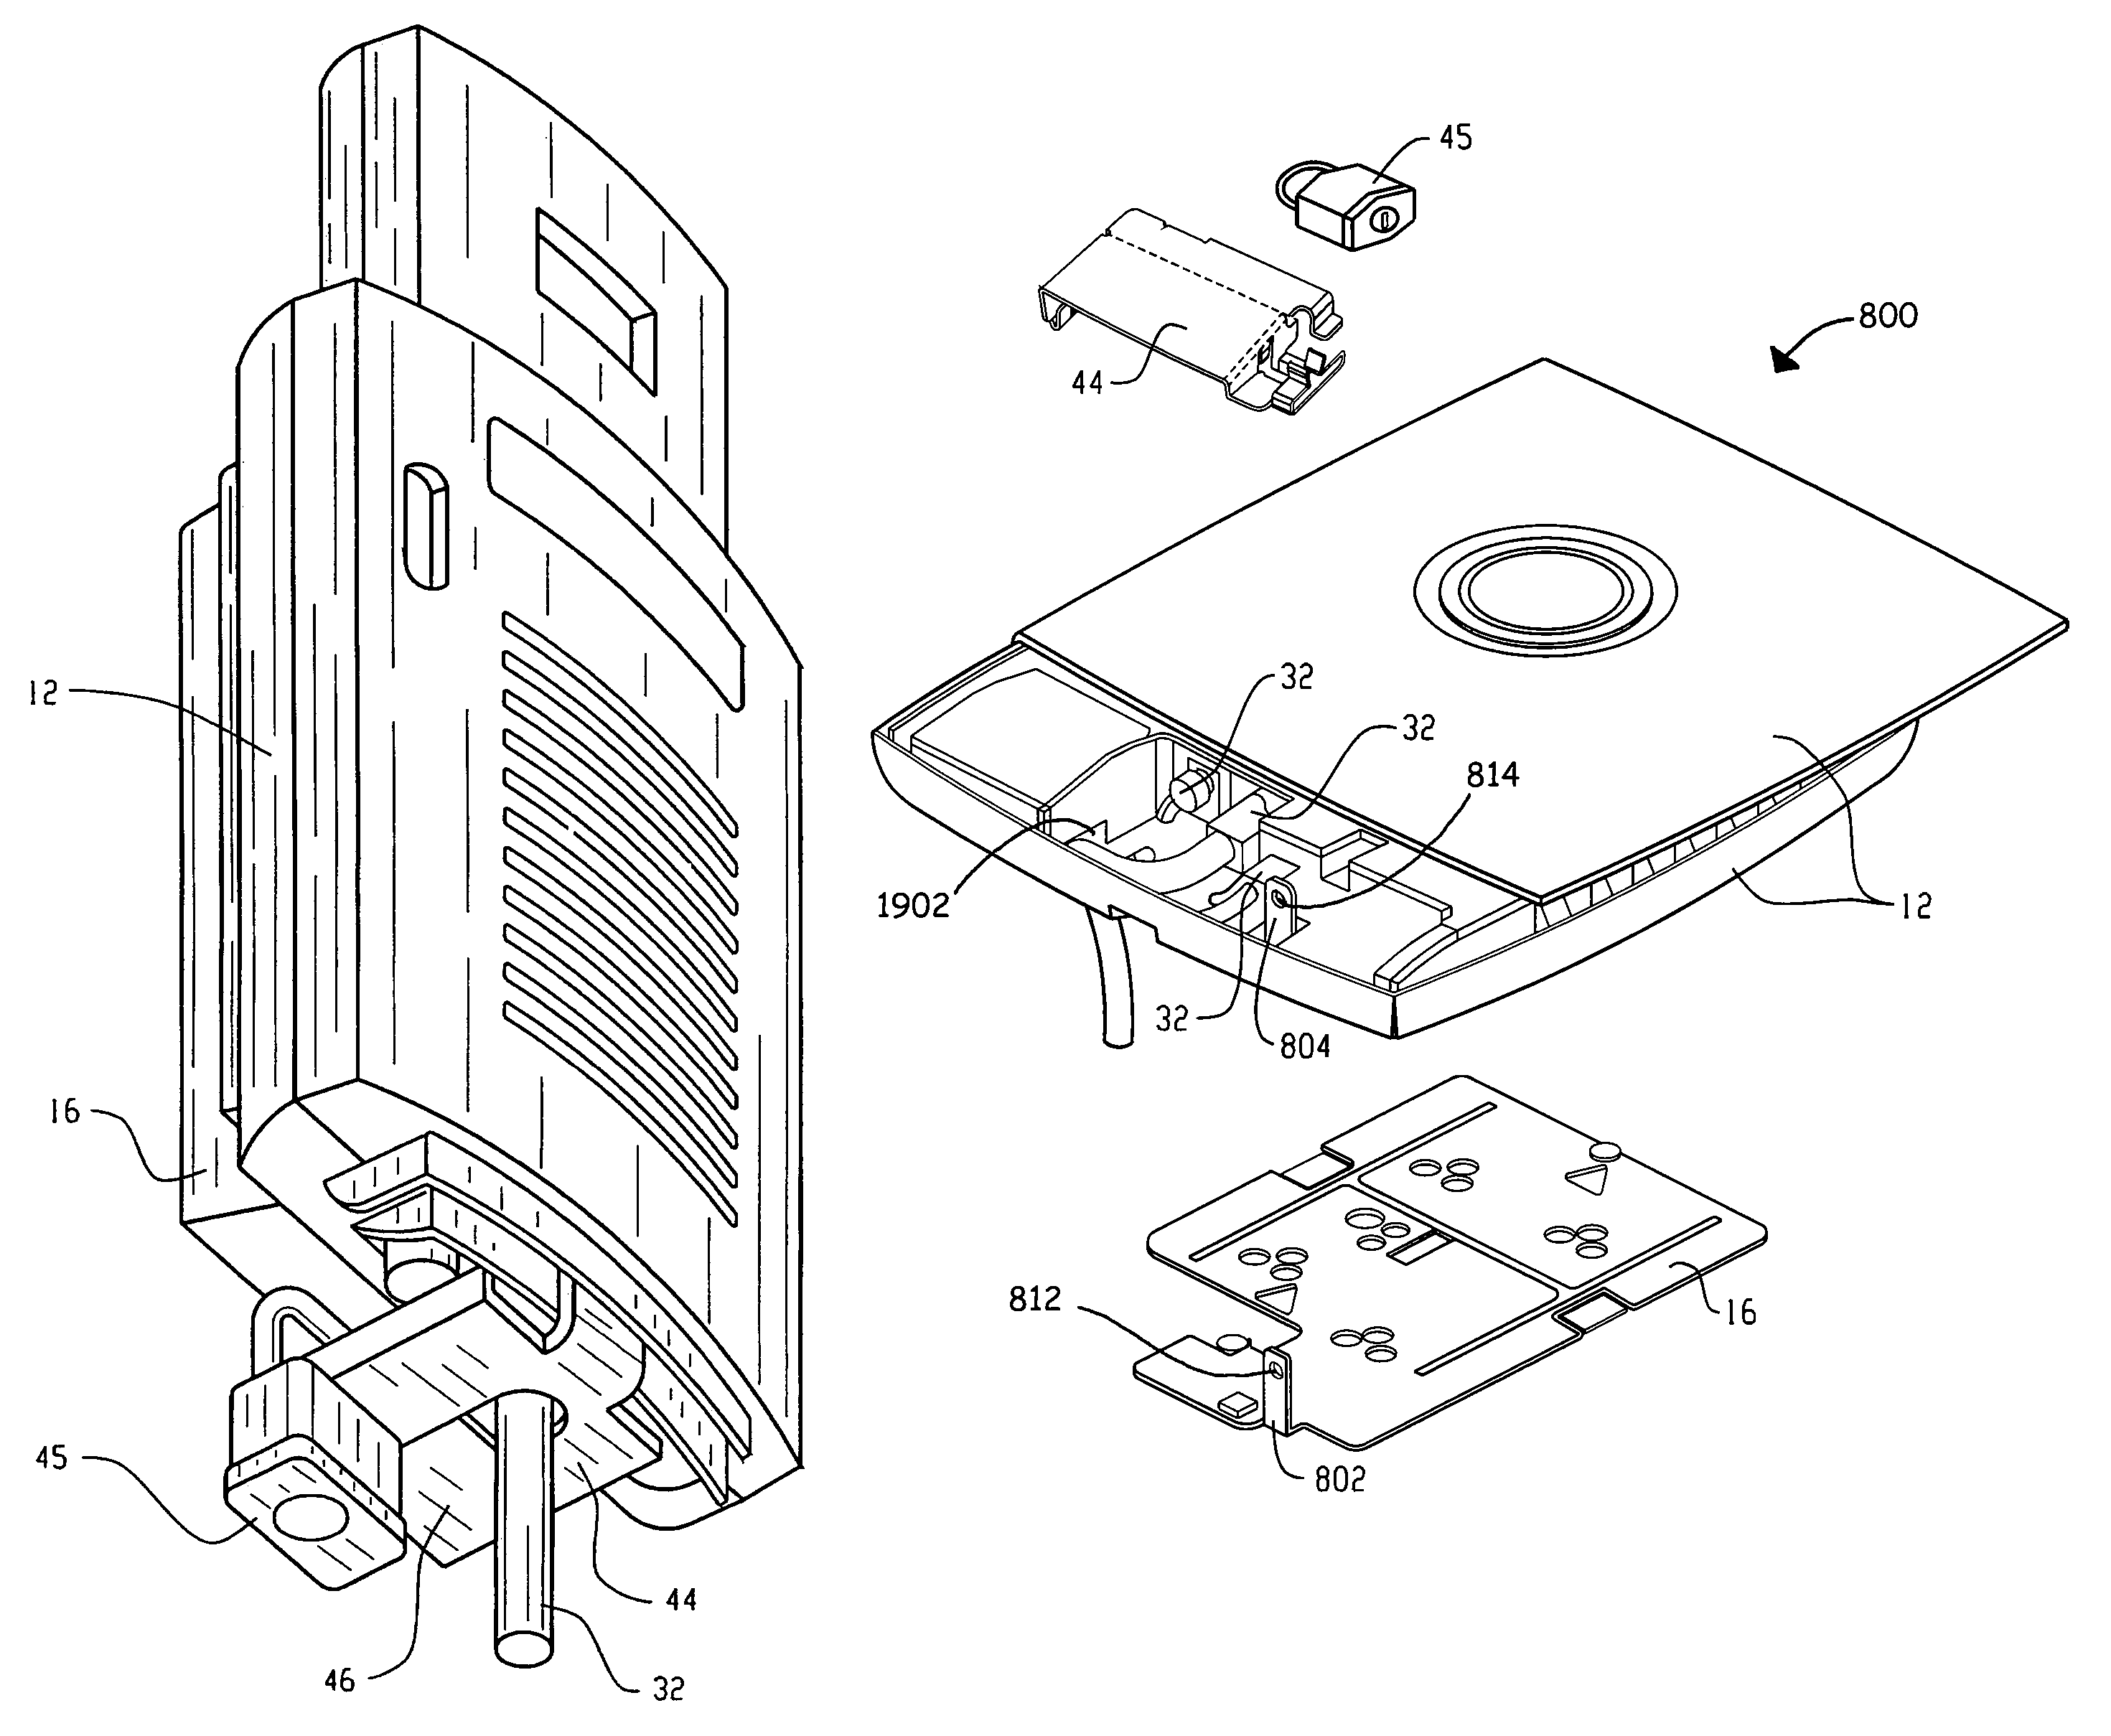 Physical security system for wireless access points that prevents removal of the access point and associated connectors